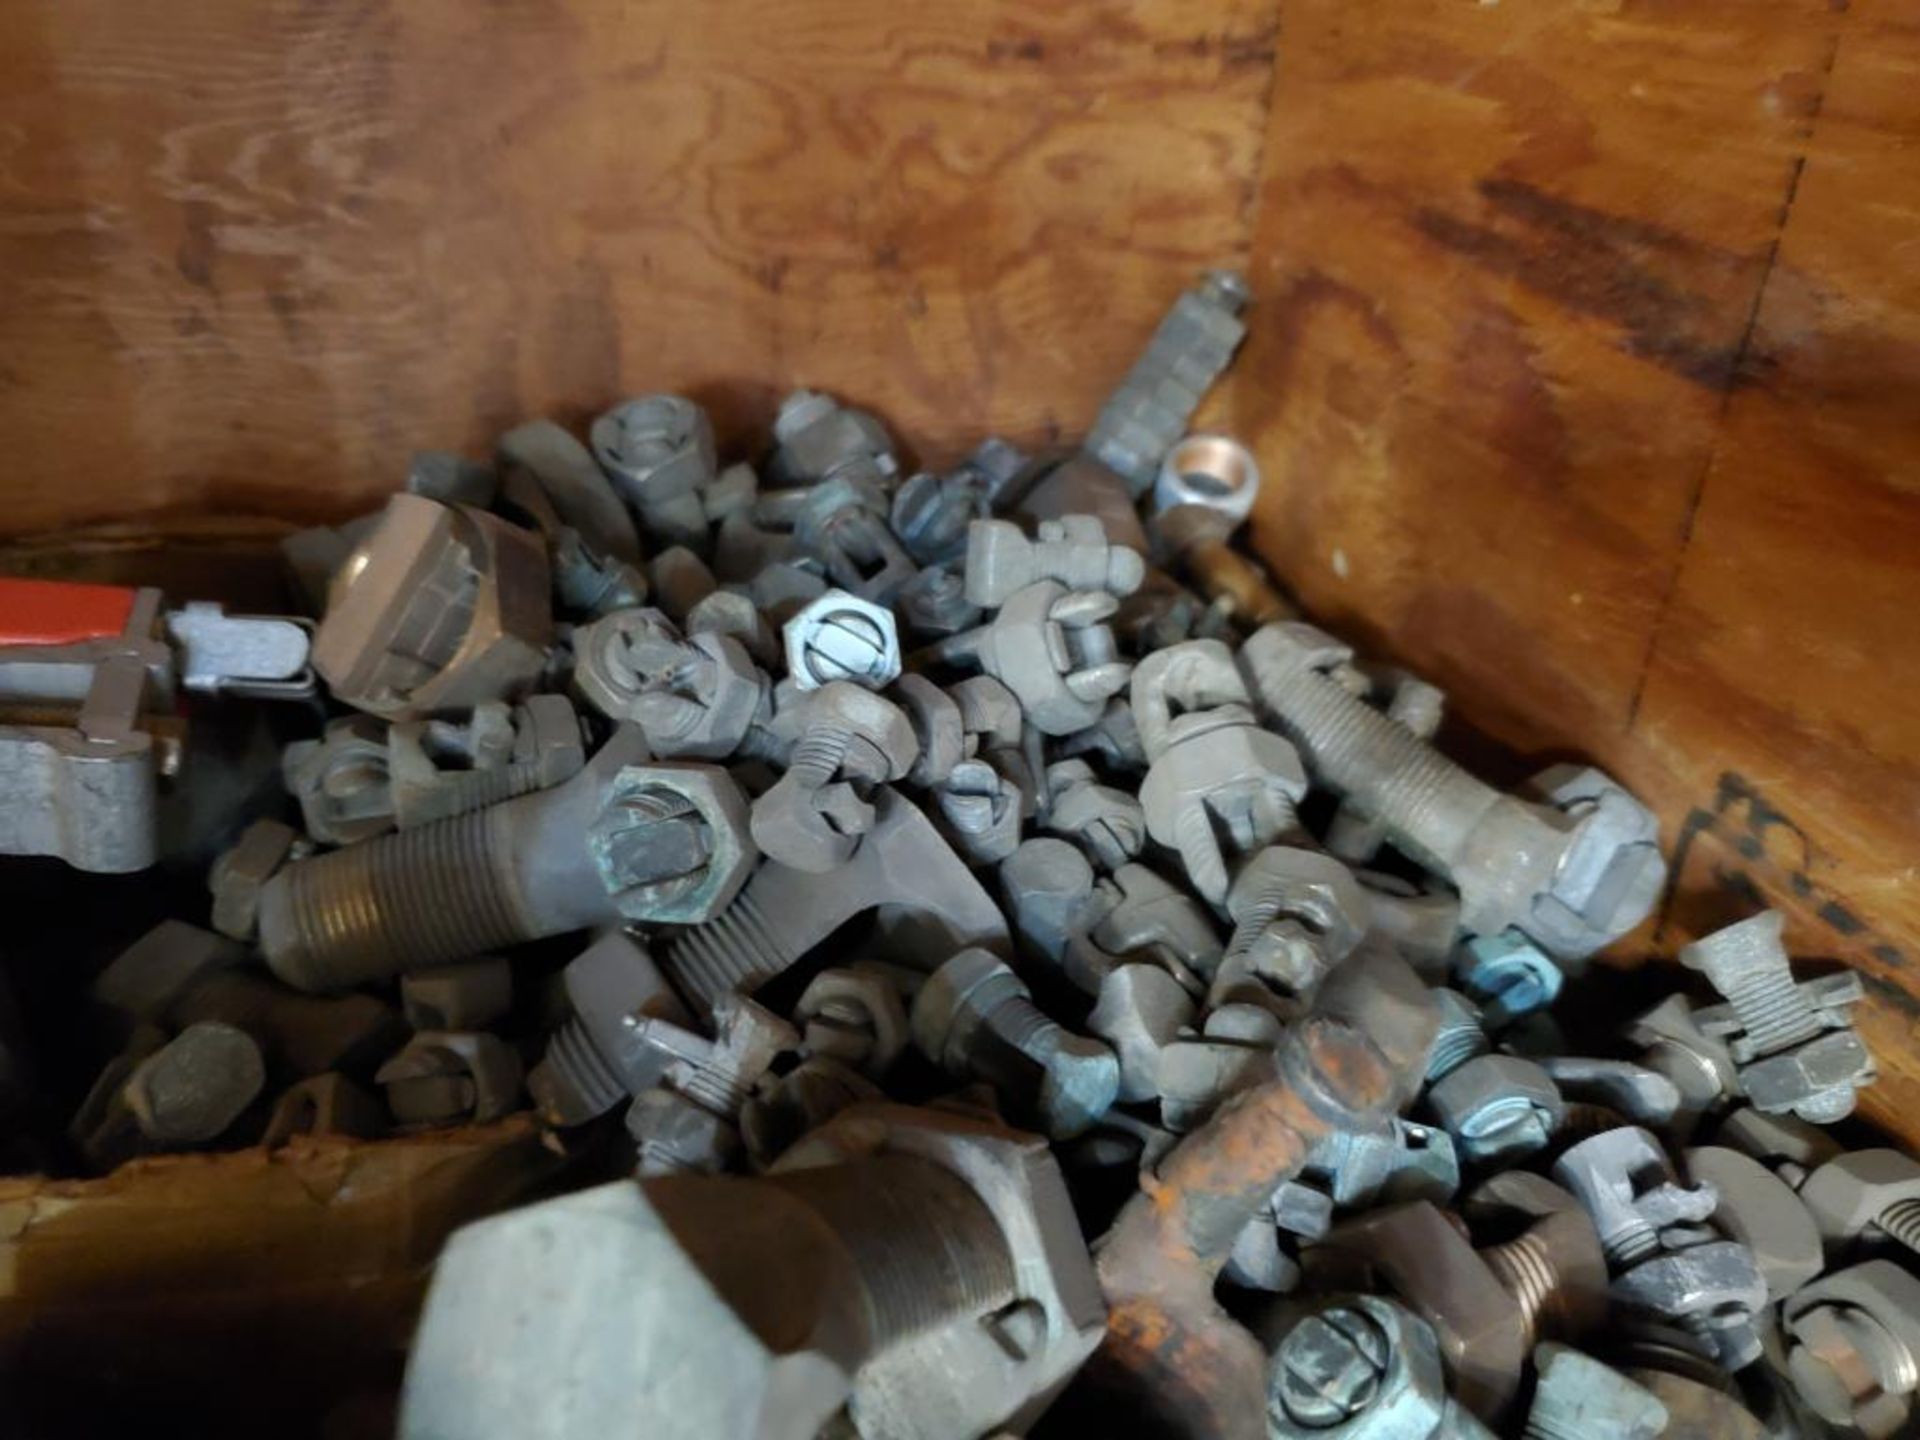 Contents of one shelf cubby - Large assortment of electrical lugs, fittings, and connectors. - Image 3 of 6